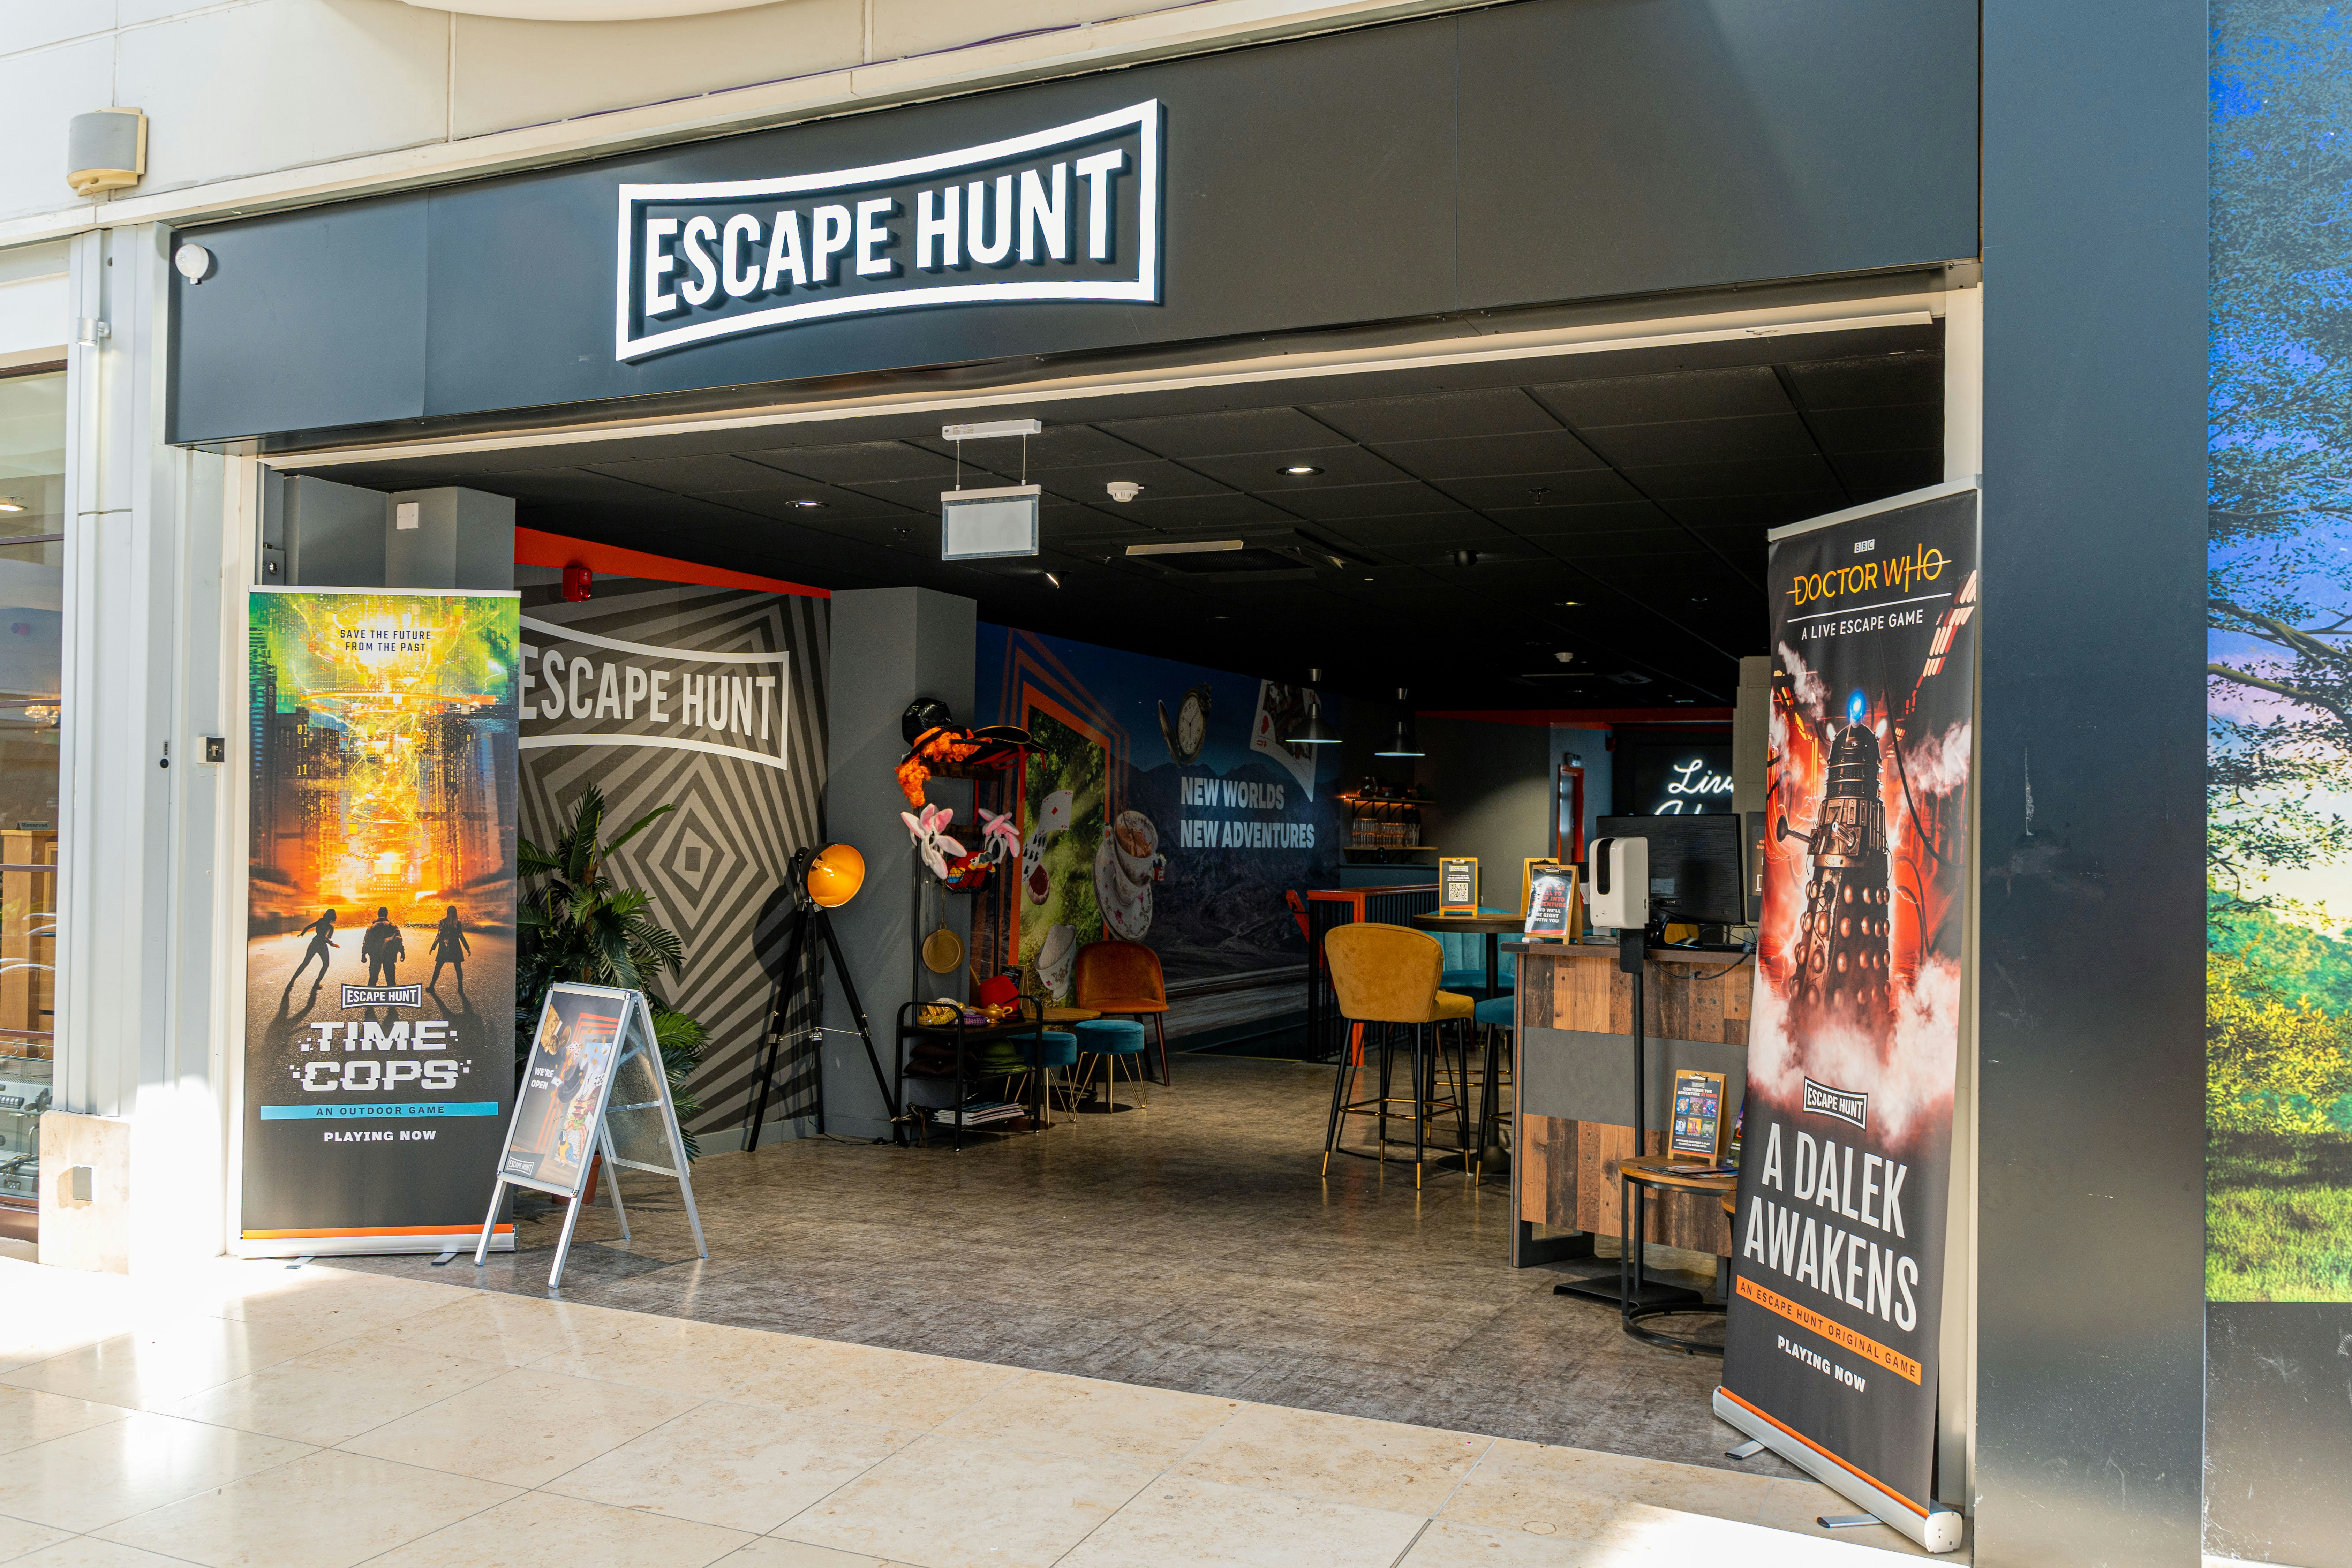 A black archway shop front reads Escape Hunt, you can see inside with various pop-up posters, seating and a desk.